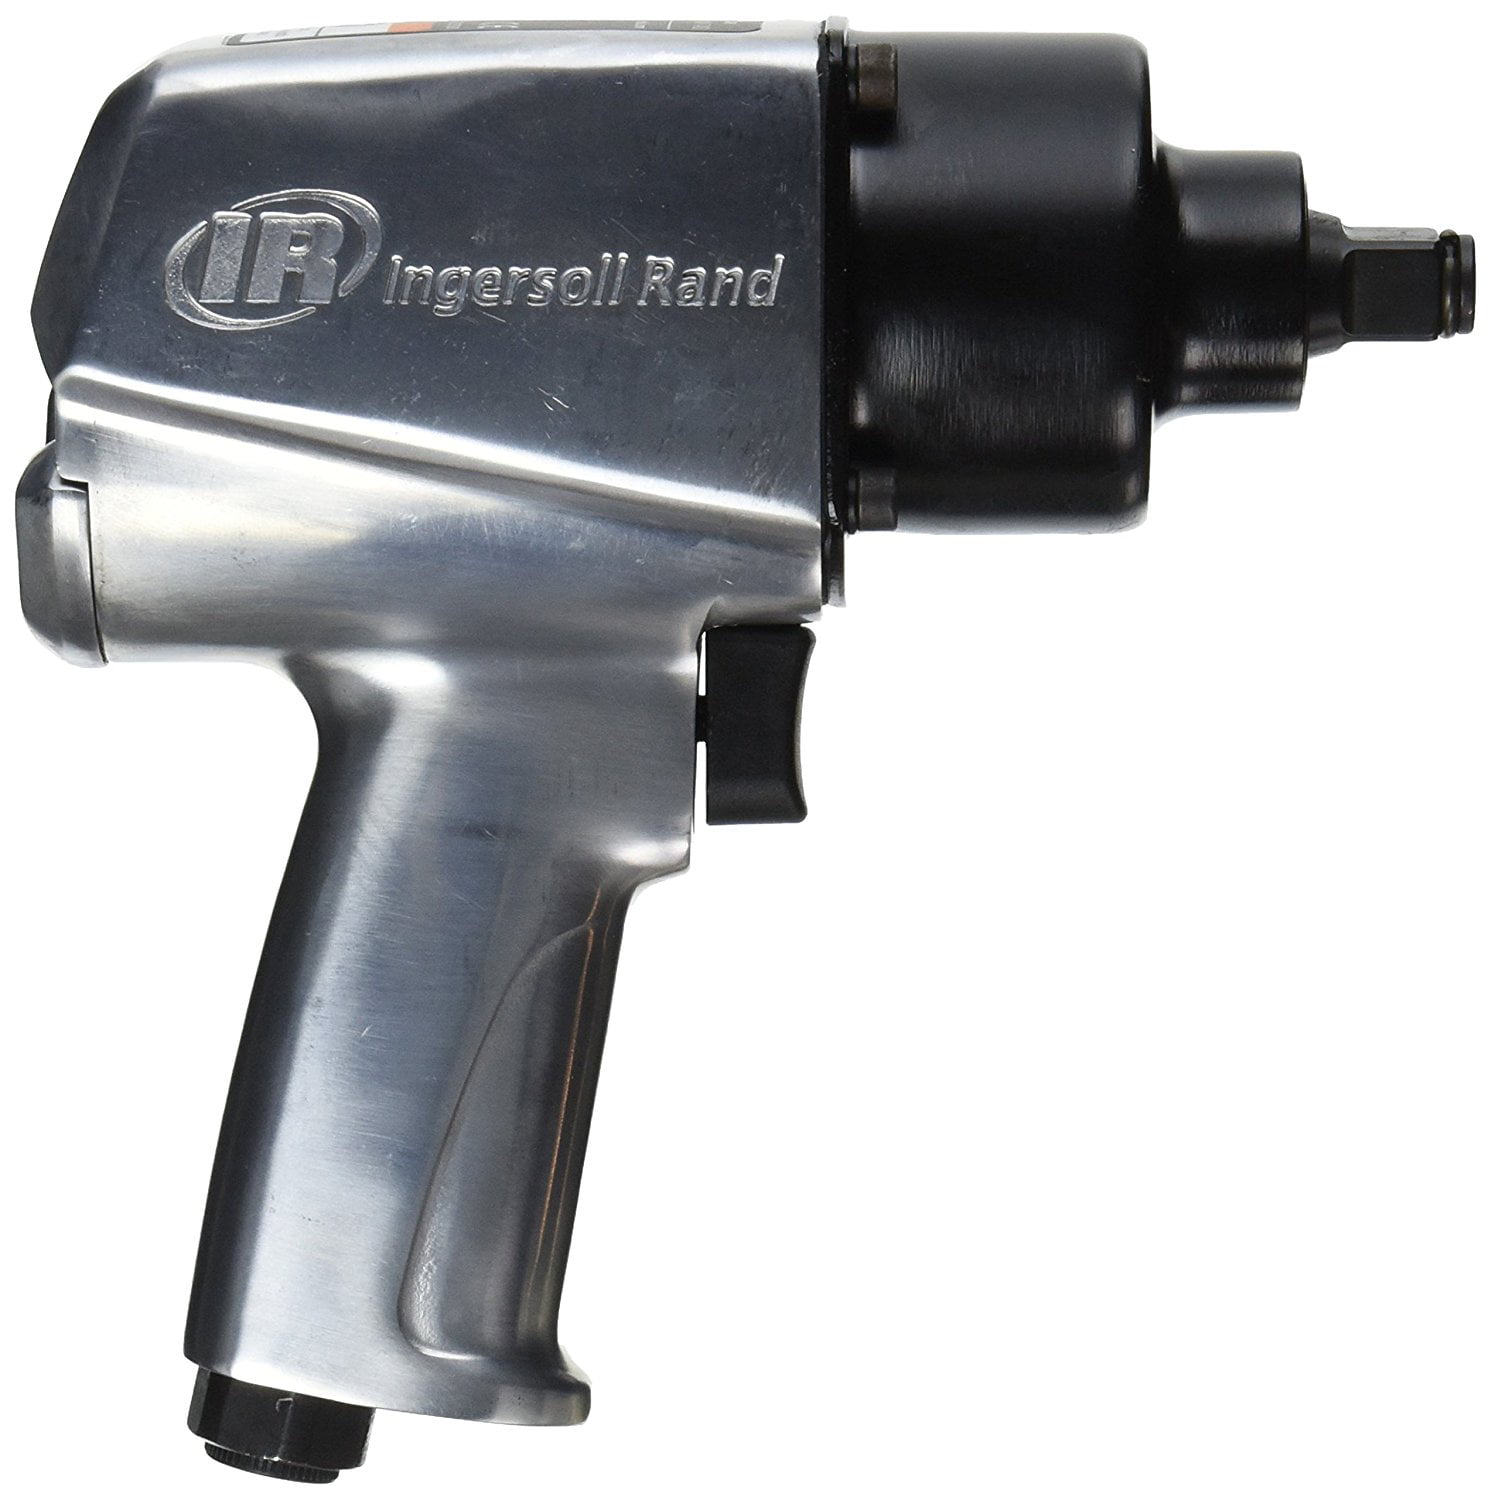 5200 rpm for sale online Ingersoll-Rand 2925RBP1TI Air Impact Wrench 3/4 in Dr 